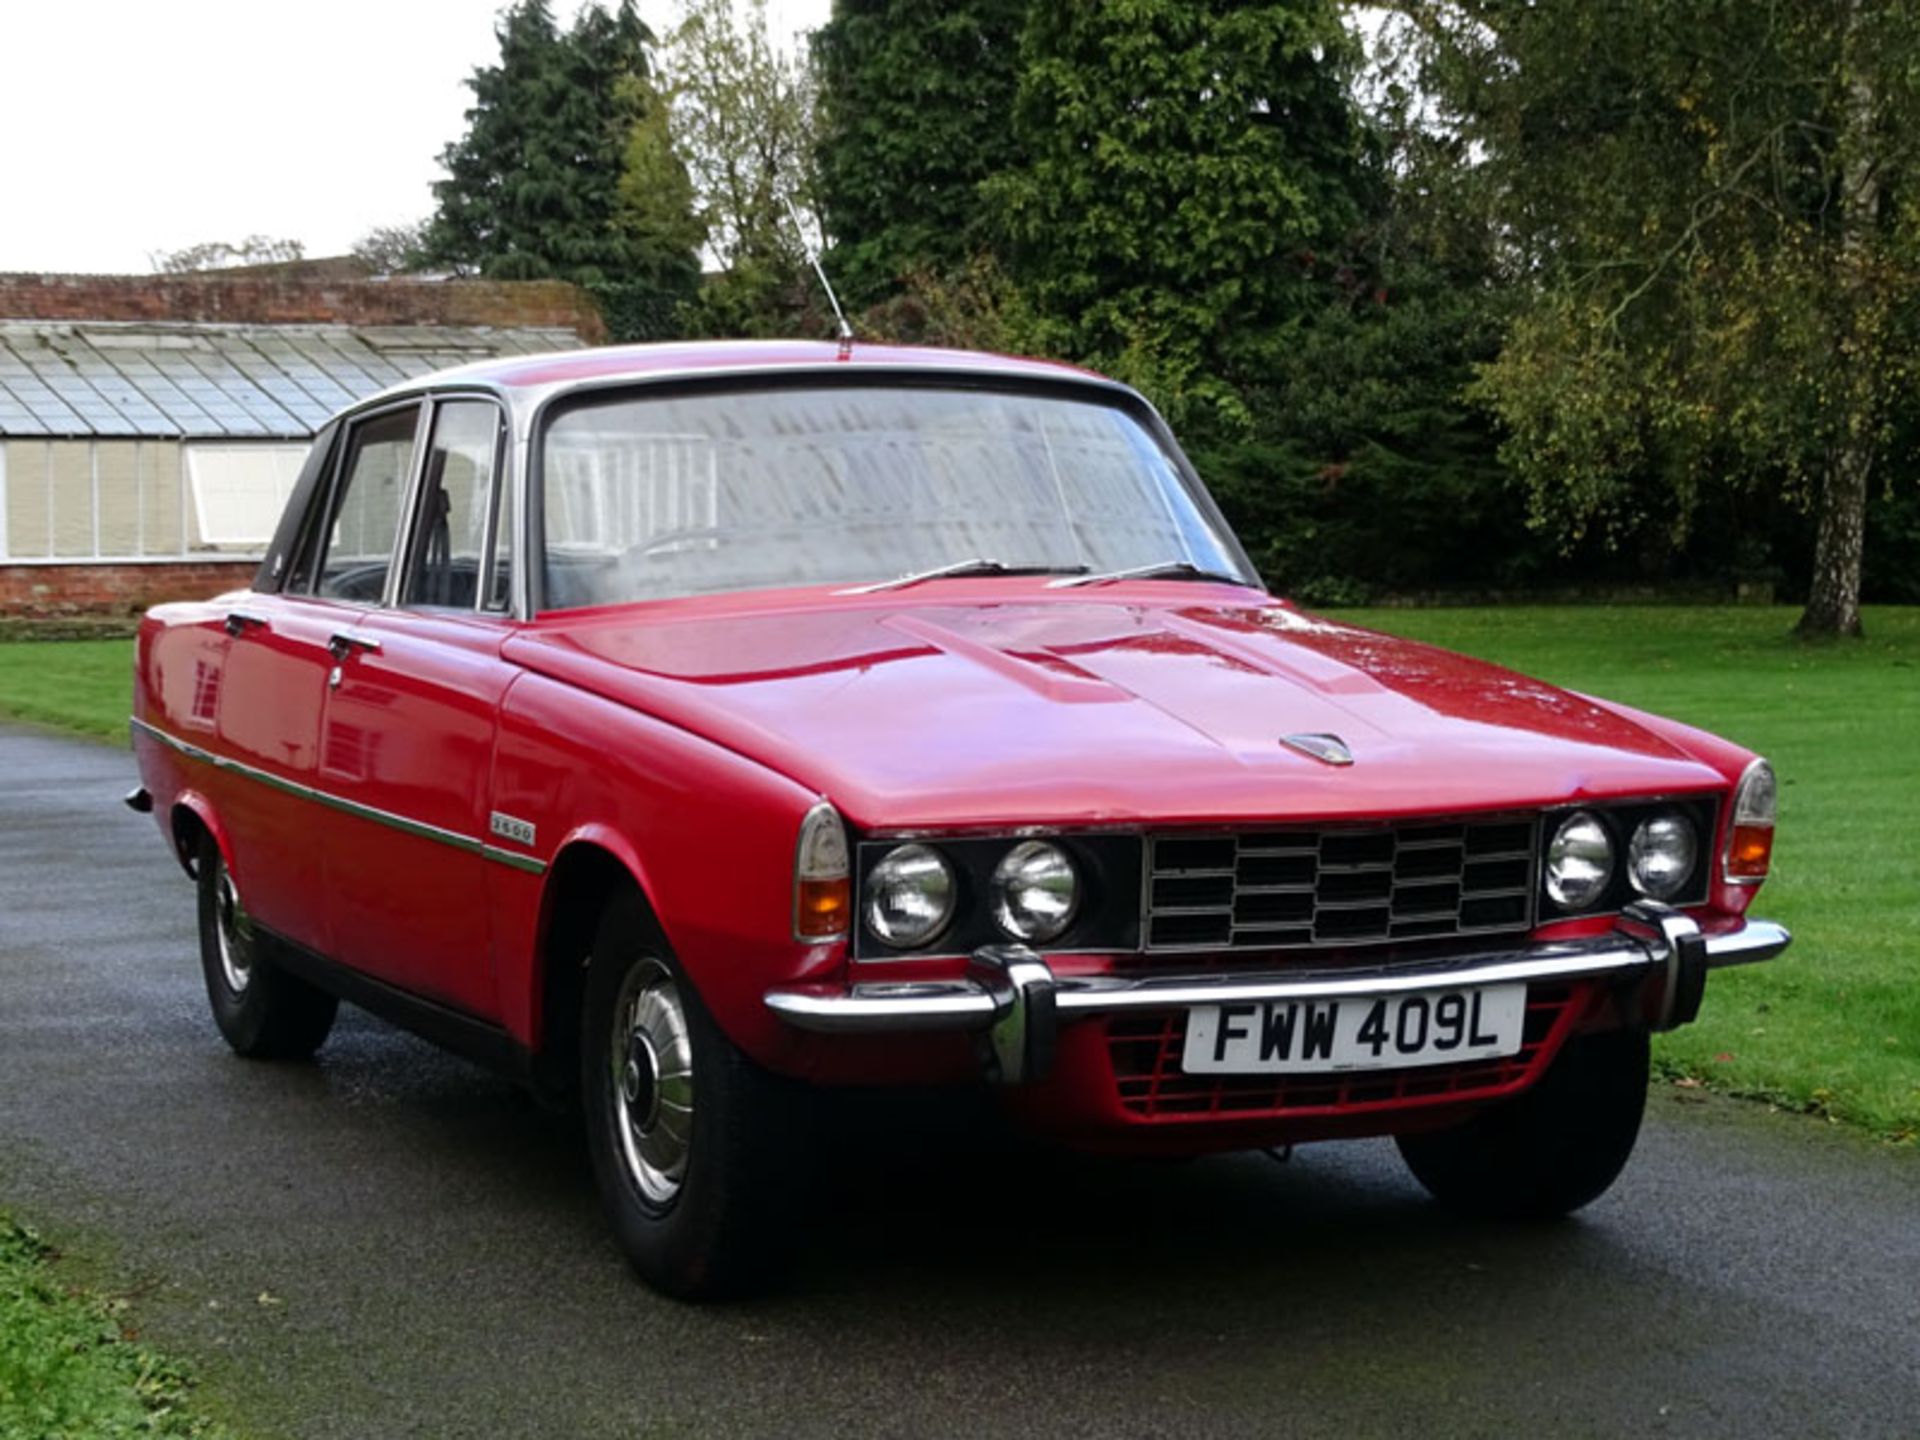 1972 Rover P6 3500 - Image 2 of 10